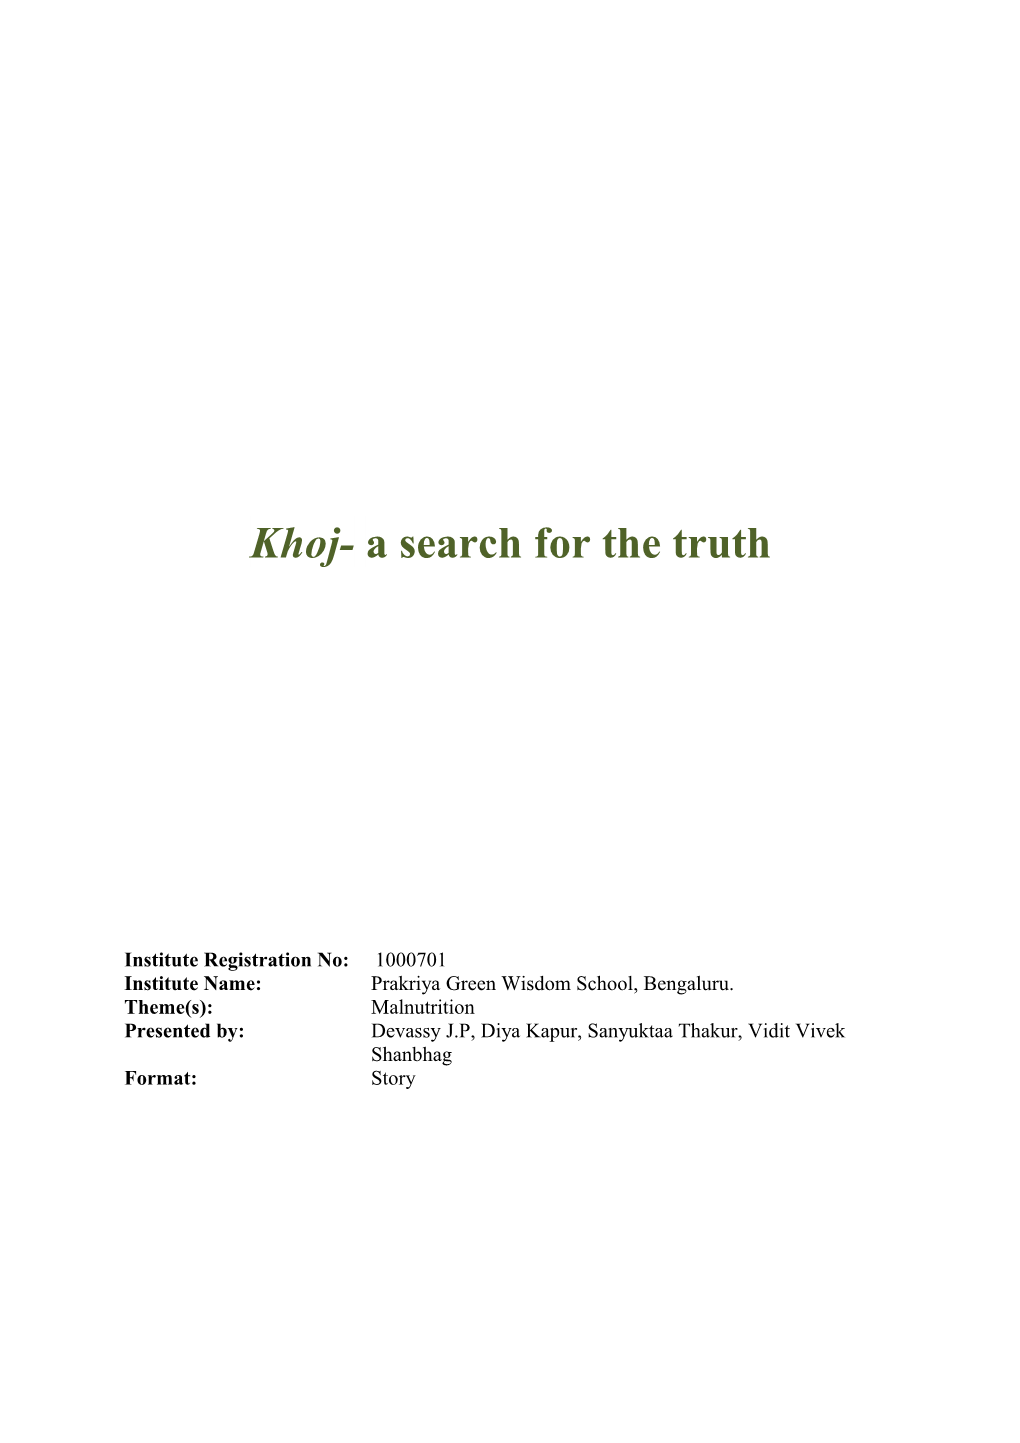 Khoj-A Search for the Truth